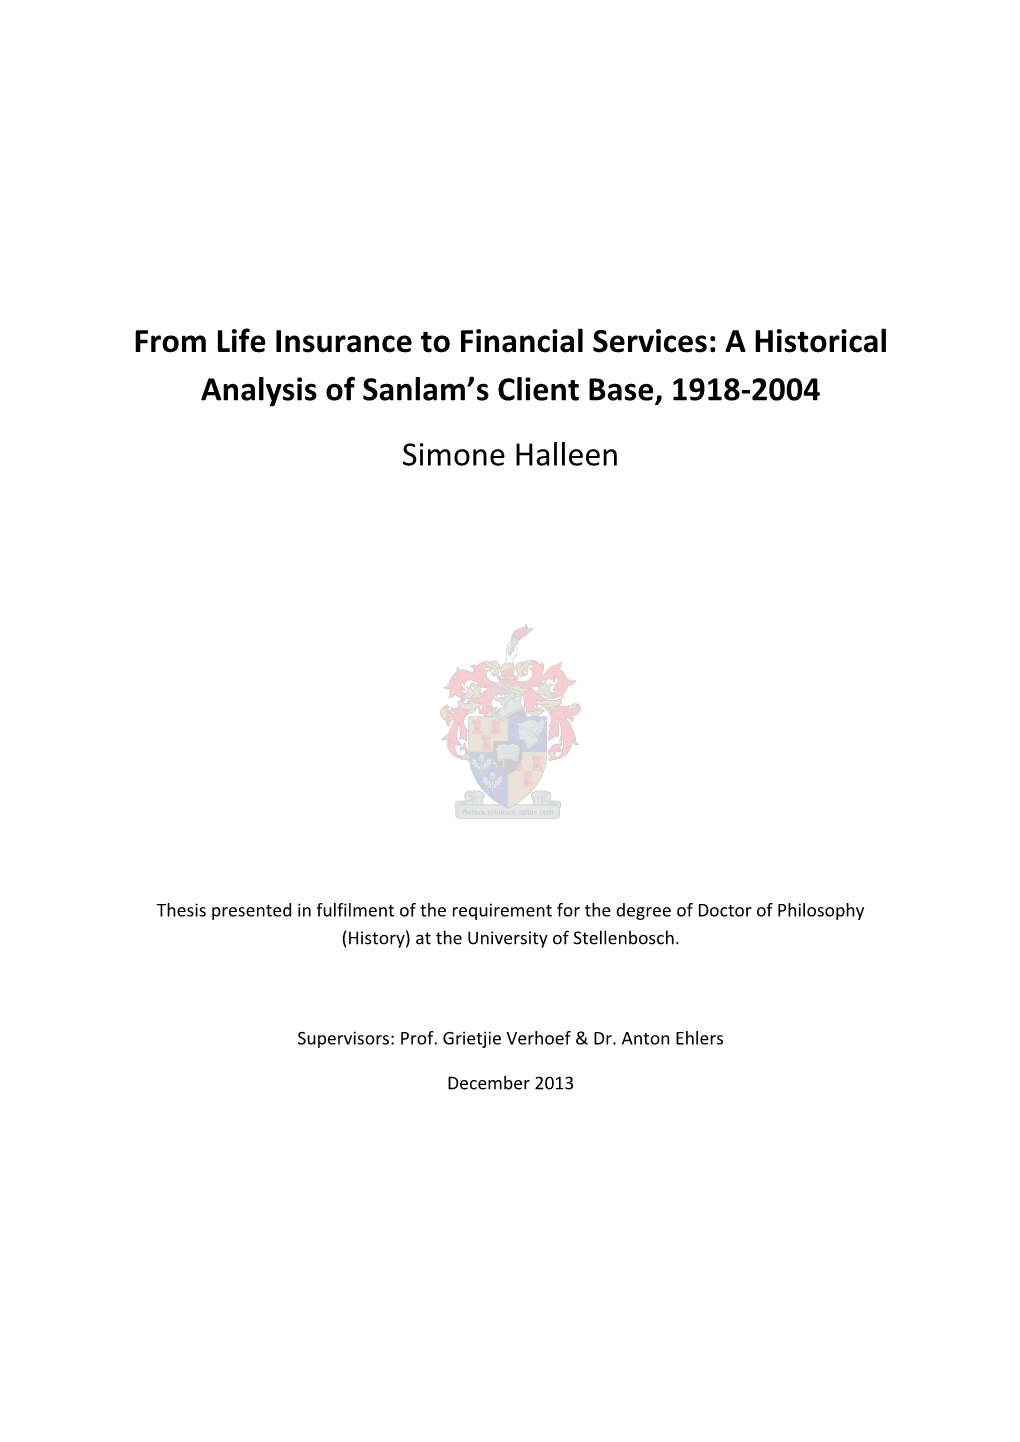 From Life Insurance to Financial Services: a Historical Analysis of Sanlam’S Client Base, 1918-2004 Simone Halleen